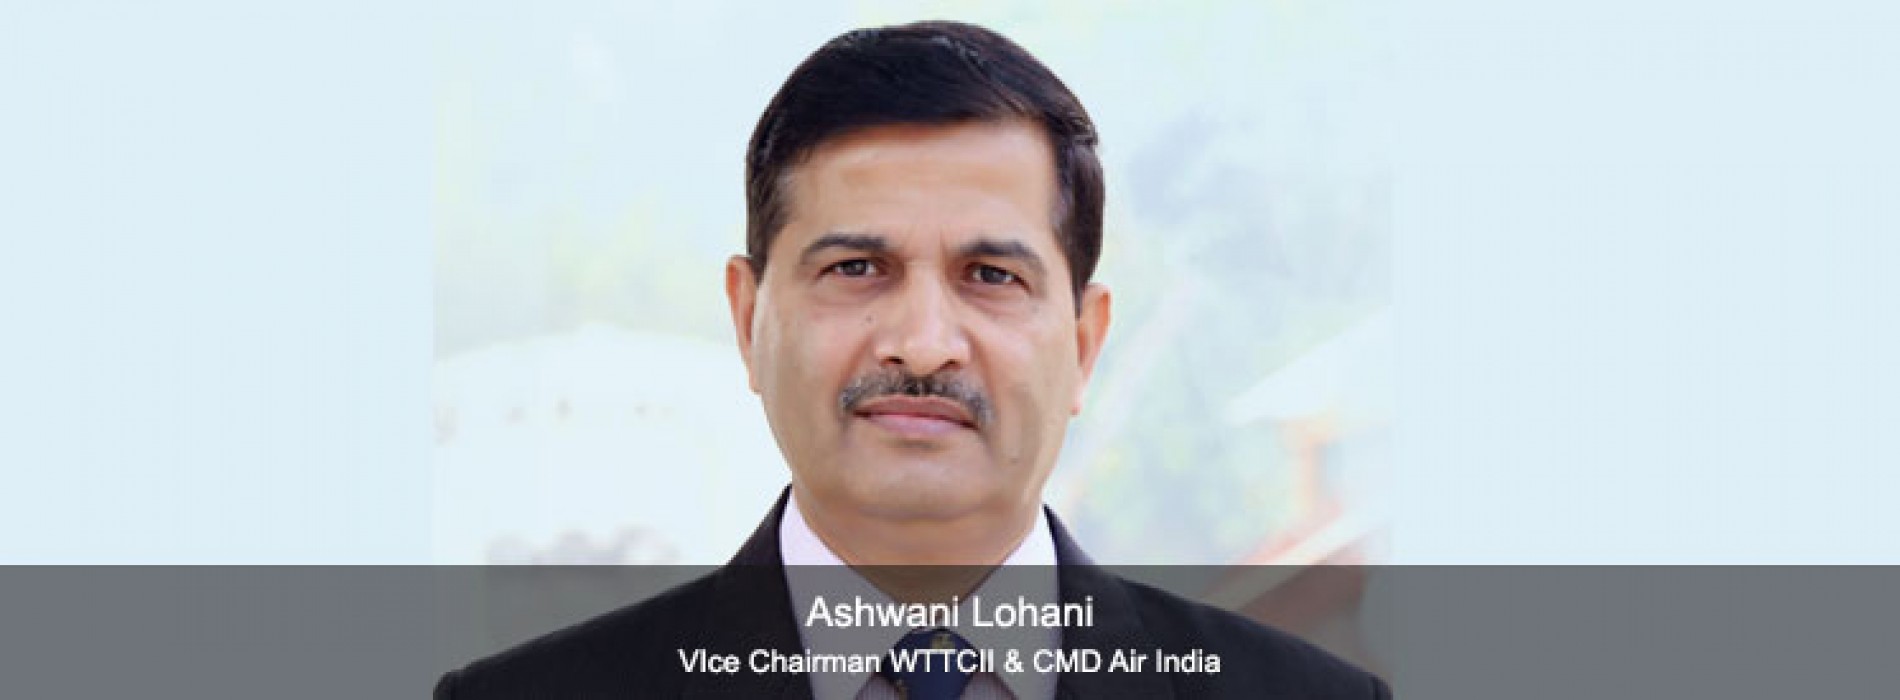 World Travel & Tourism Council, India Initiative appoints new office bearers for 2016